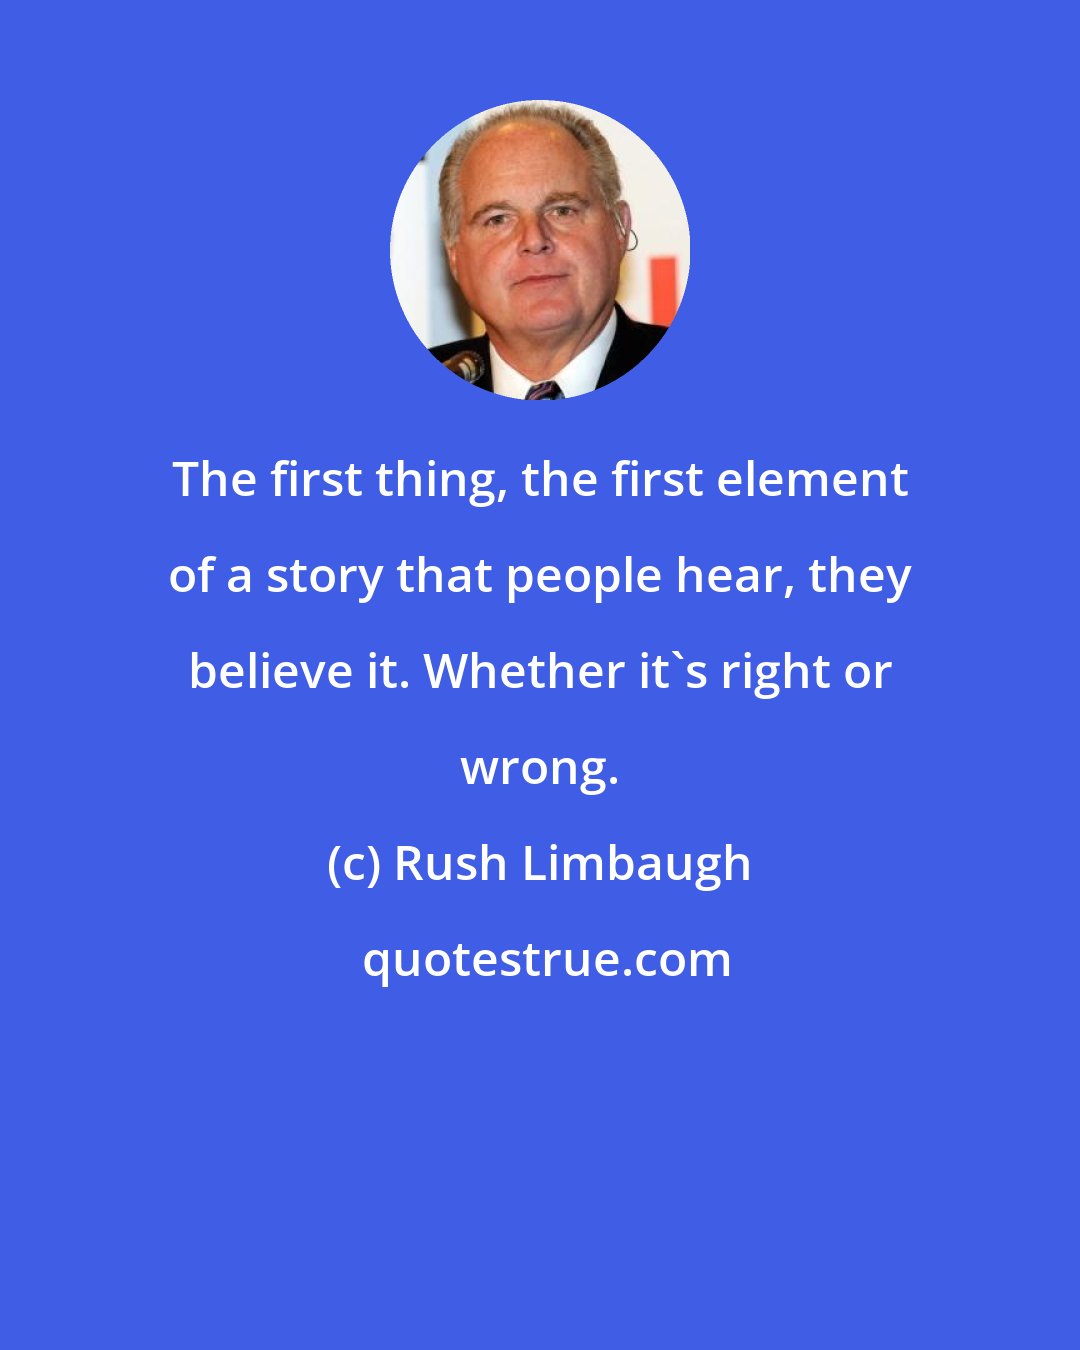 Rush Limbaugh: The first thing, the first element of a story that people hear, they believe it. Whether it's right or wrong.